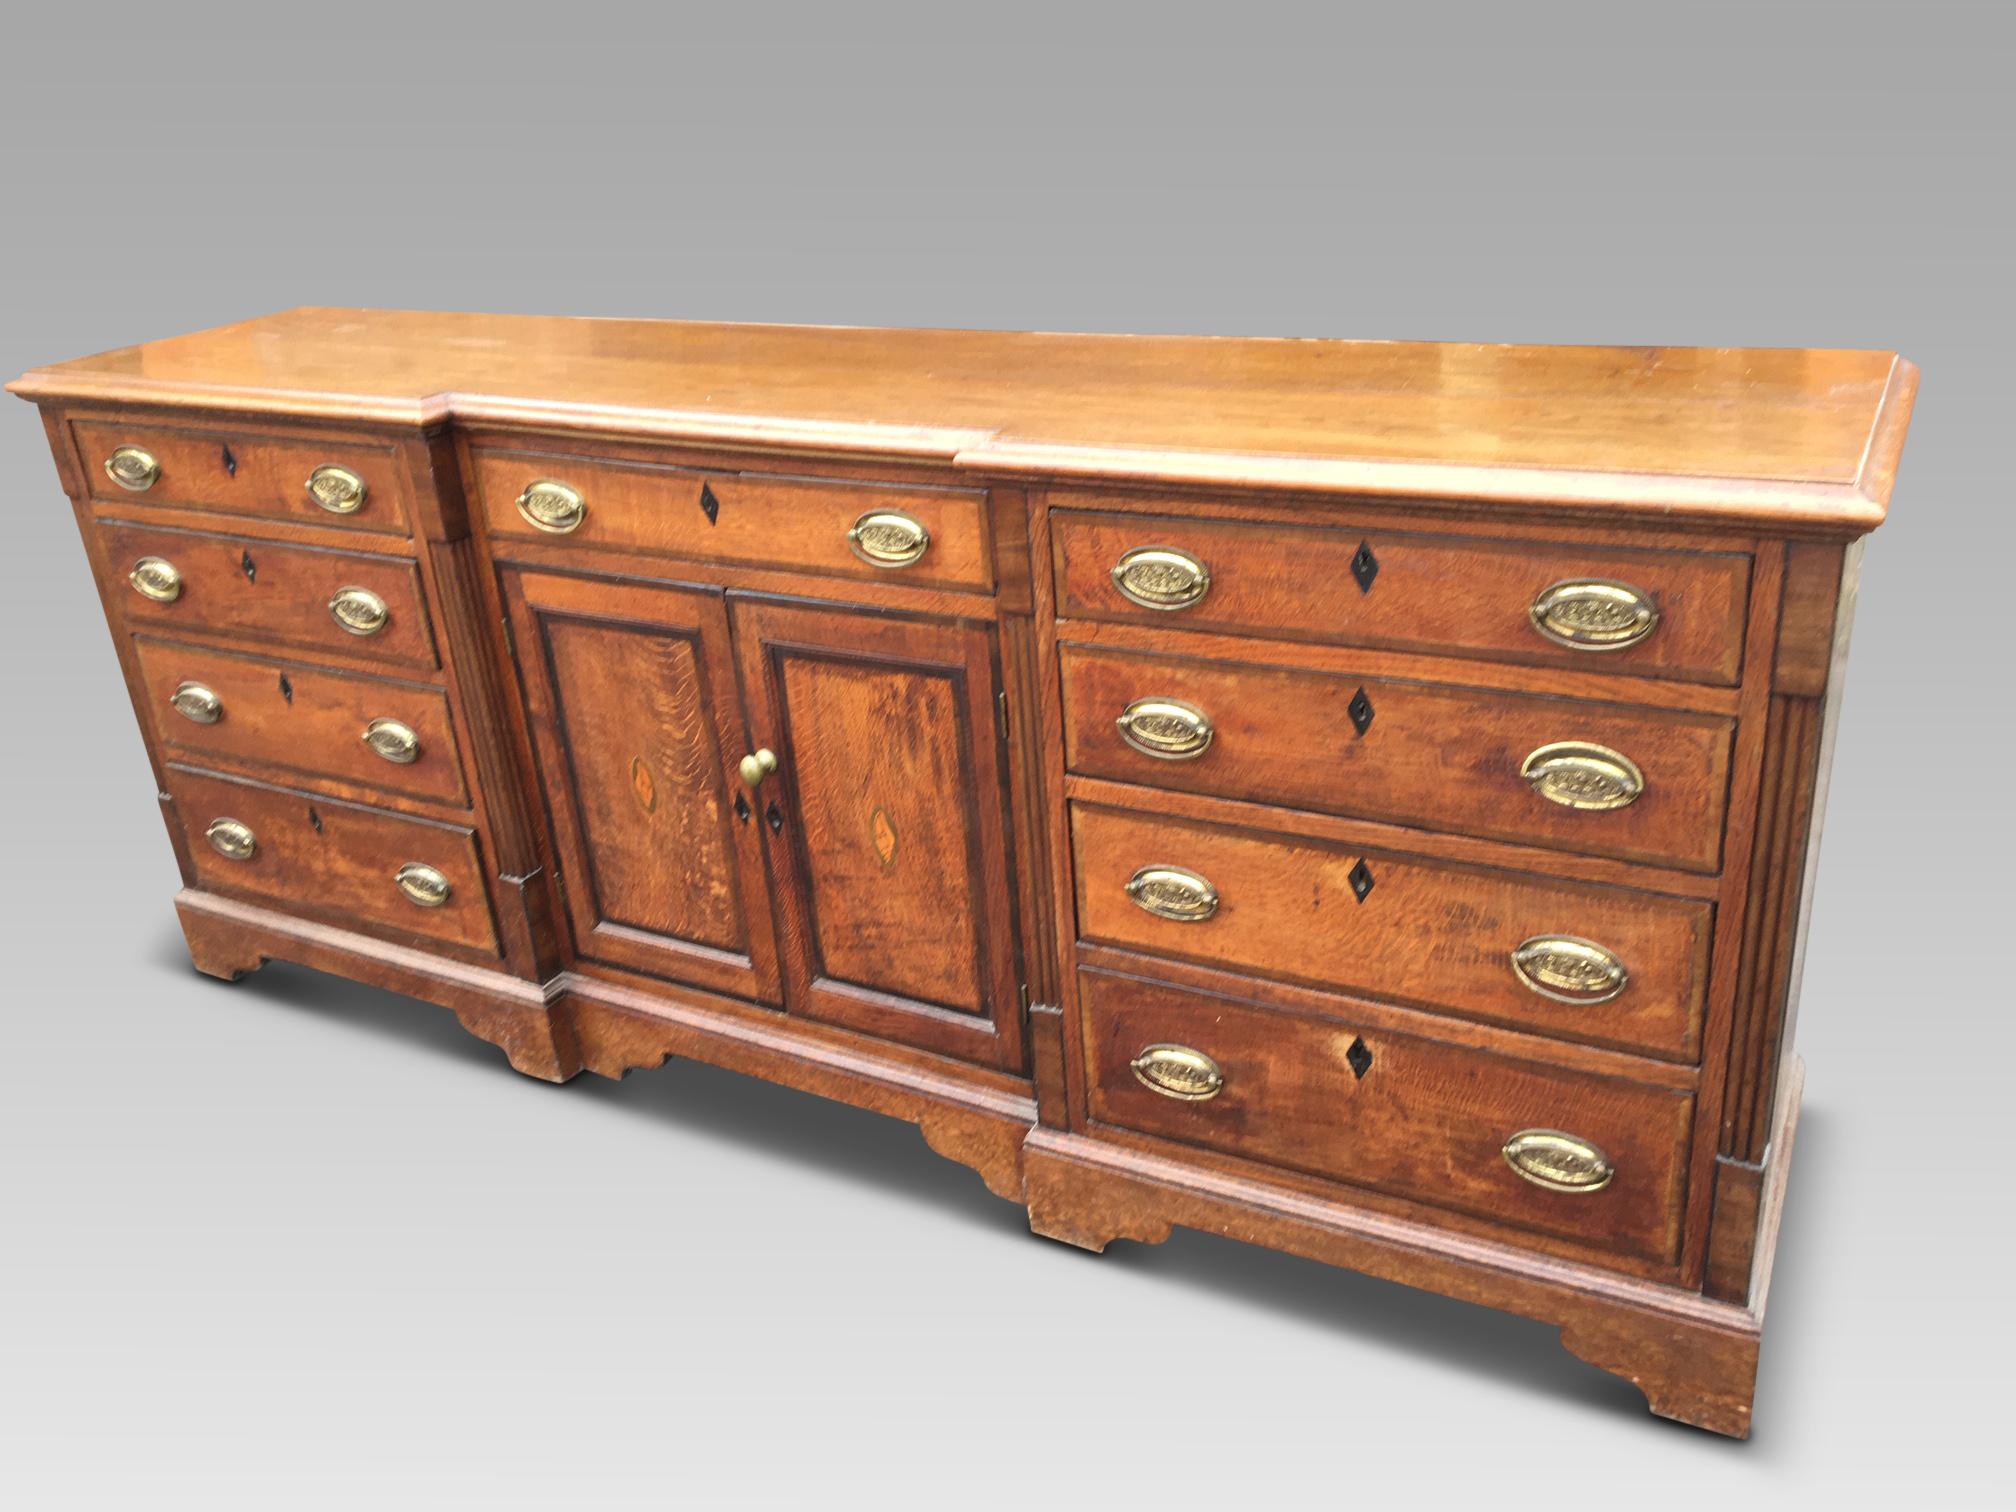 Large English oak dresser base, dating from the early 1800s
This delightful antique dresser has been well maintained by former owners and is shown herewith a great color and rich antique patination. This dresser has 9 smoothly running drawers and a